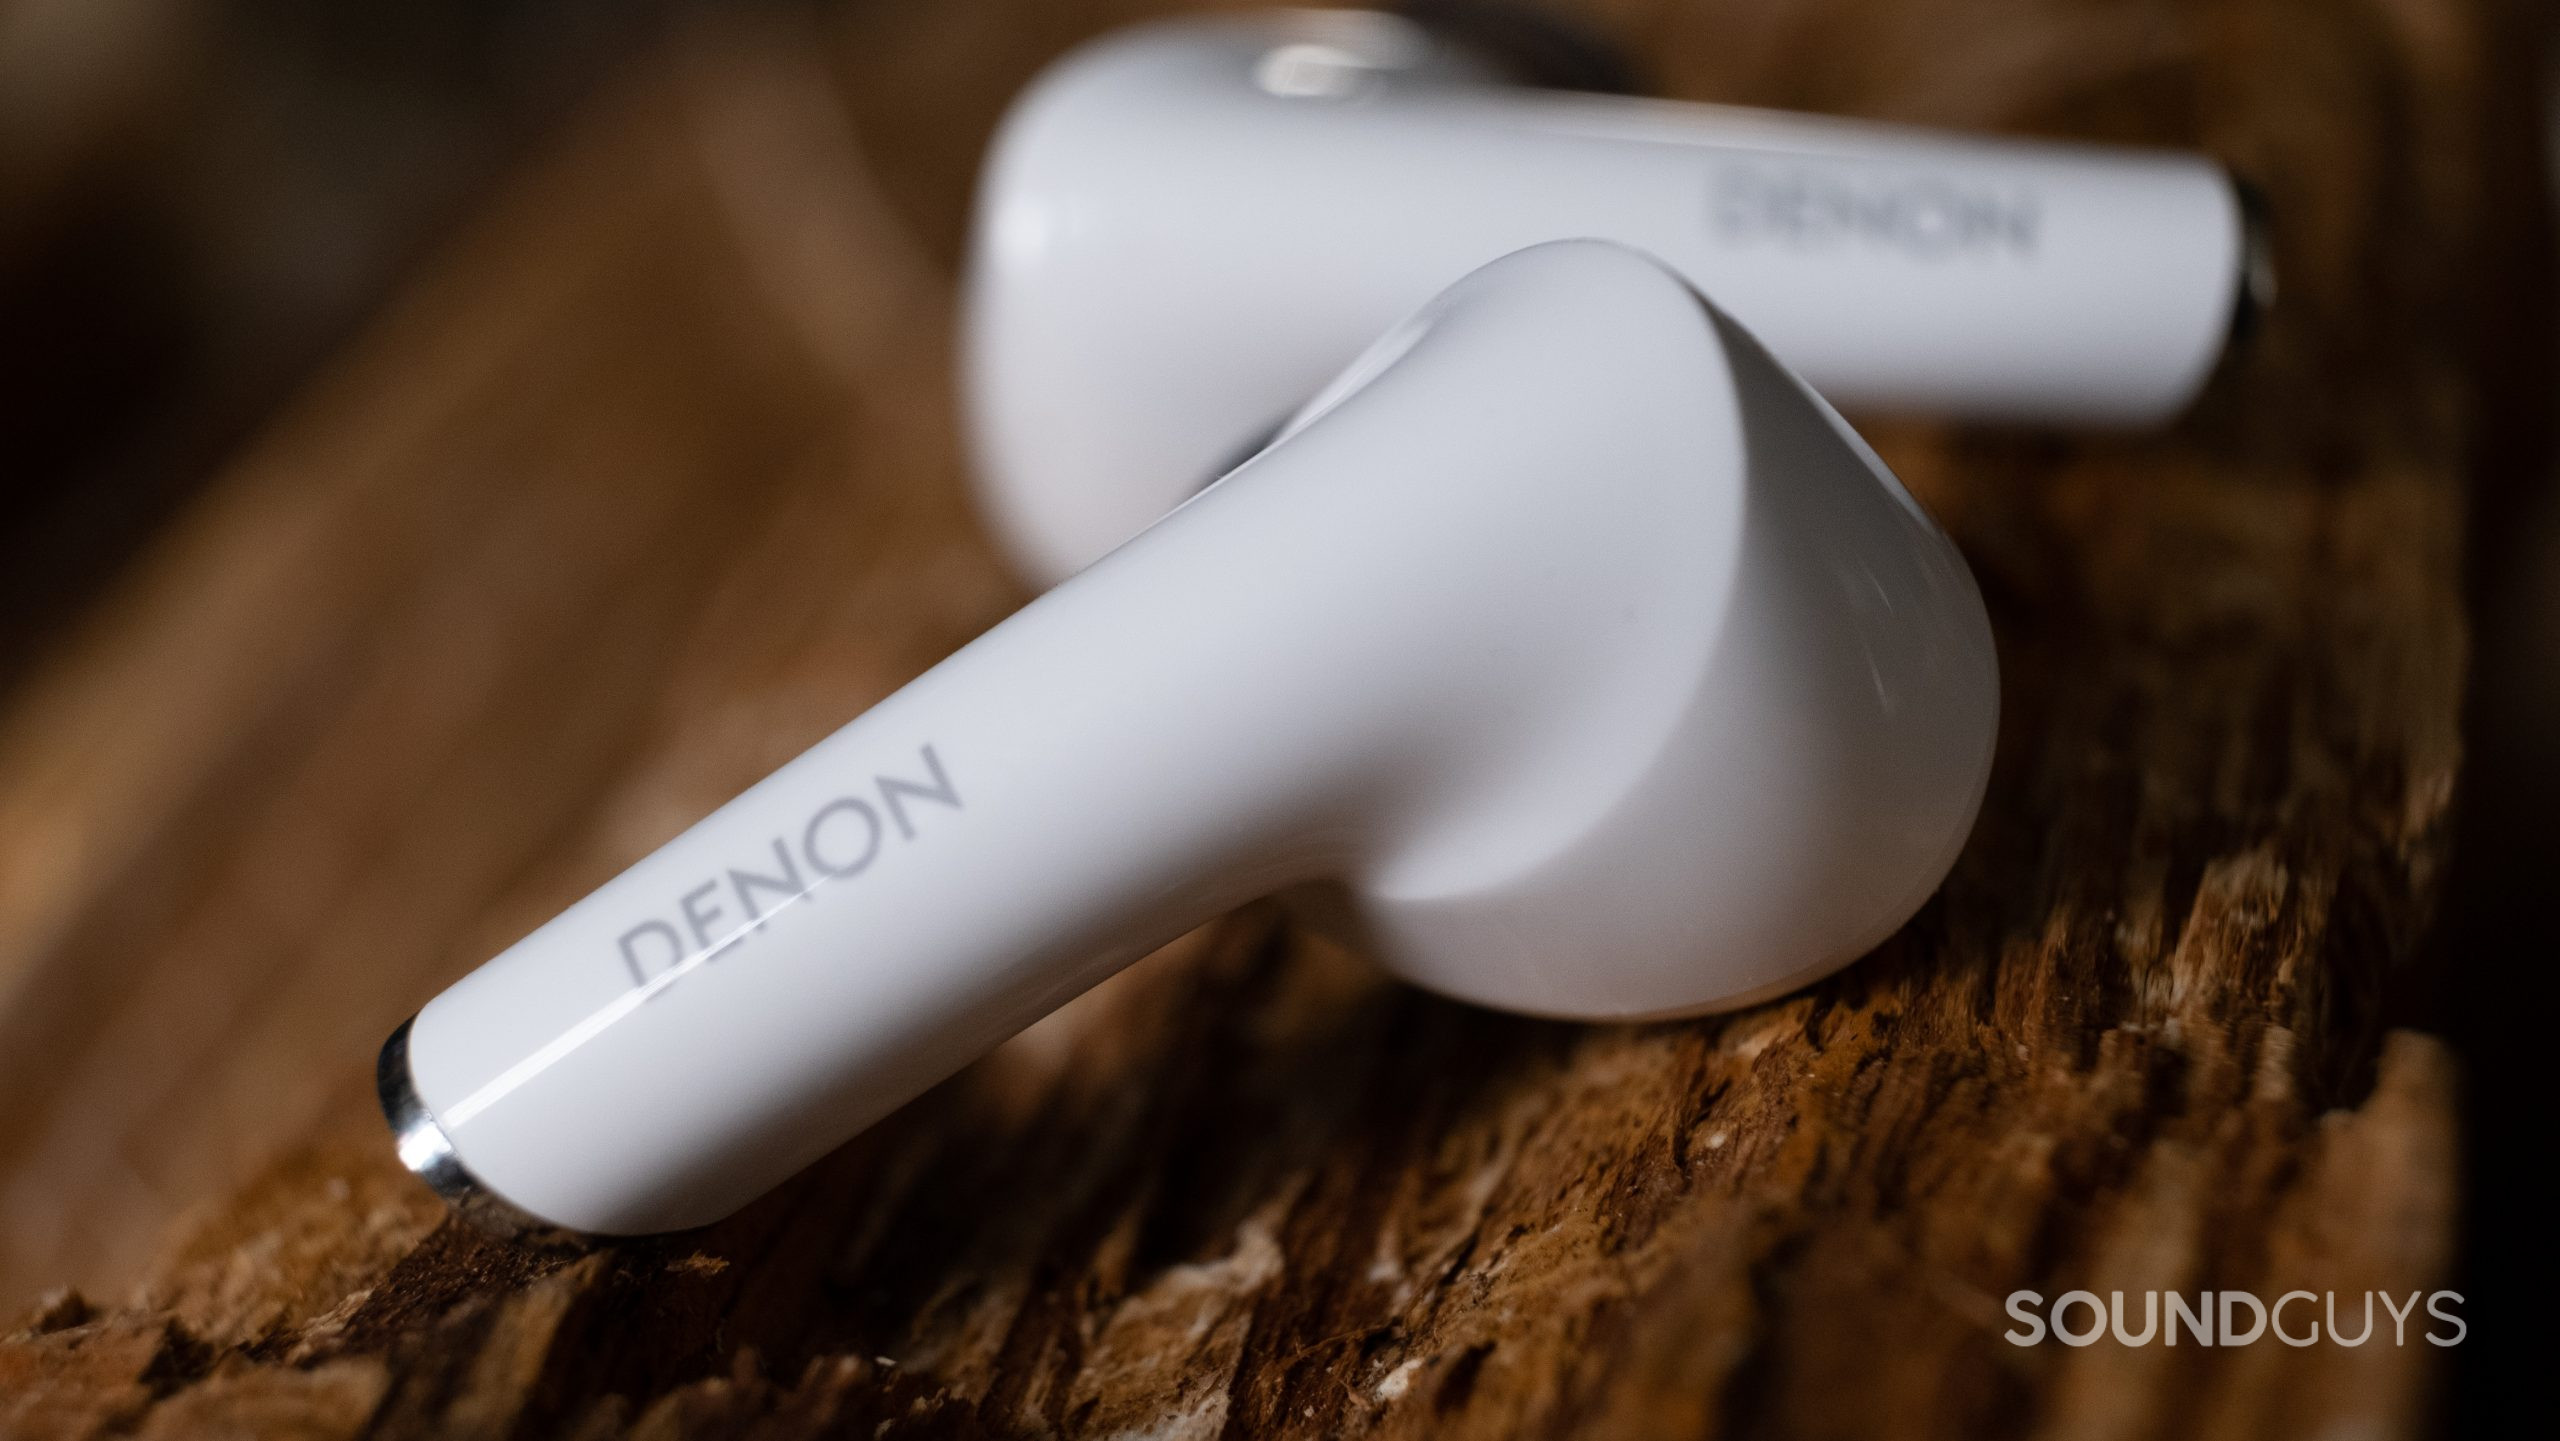 The Denon AH-C830CNW earbuds in close up resting on rough wood.